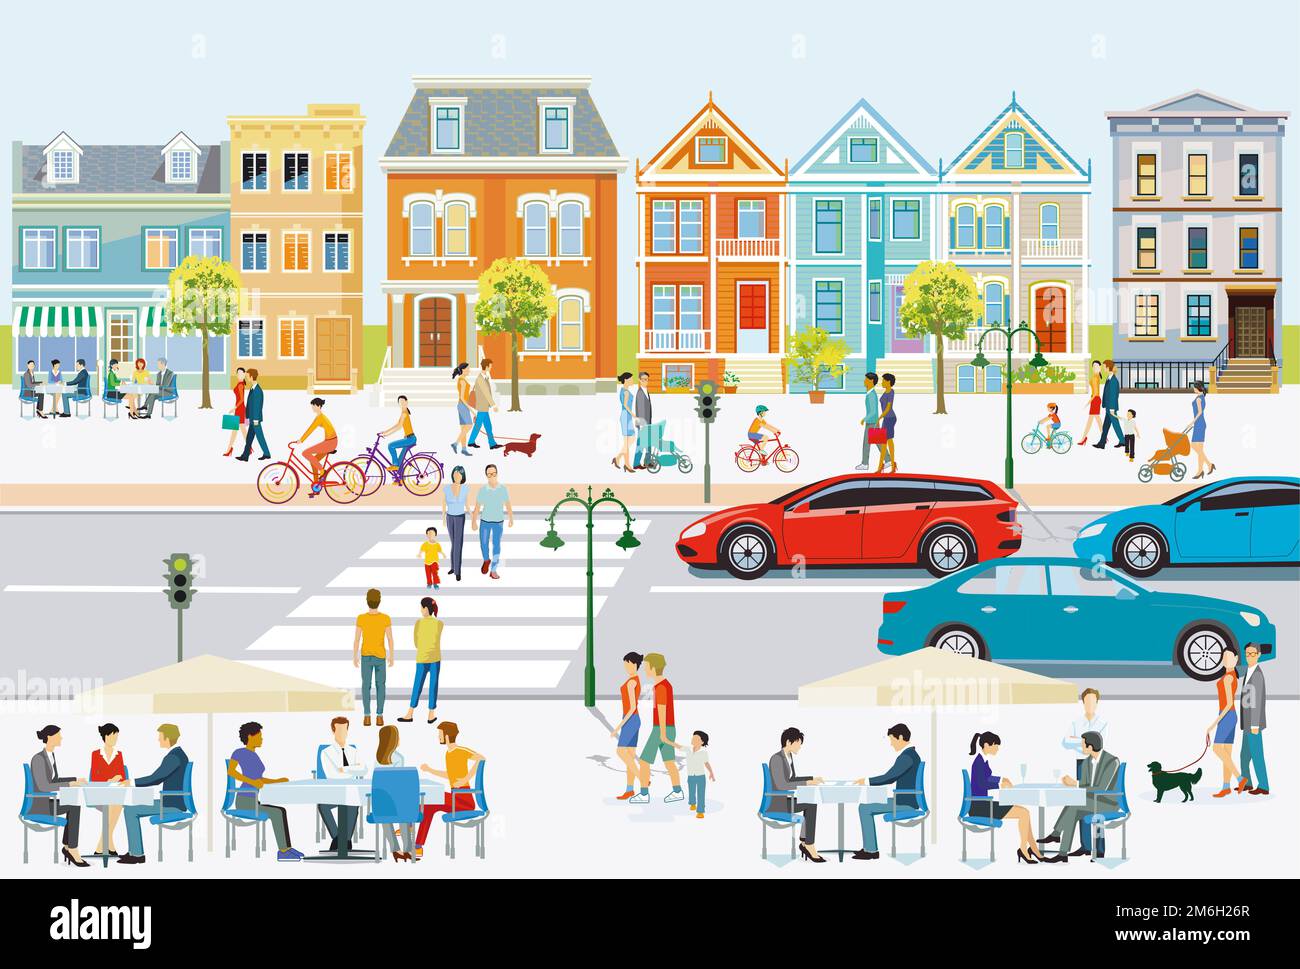 City life, with road traffic, pedestrians and families in free time, illustration Stock Photo